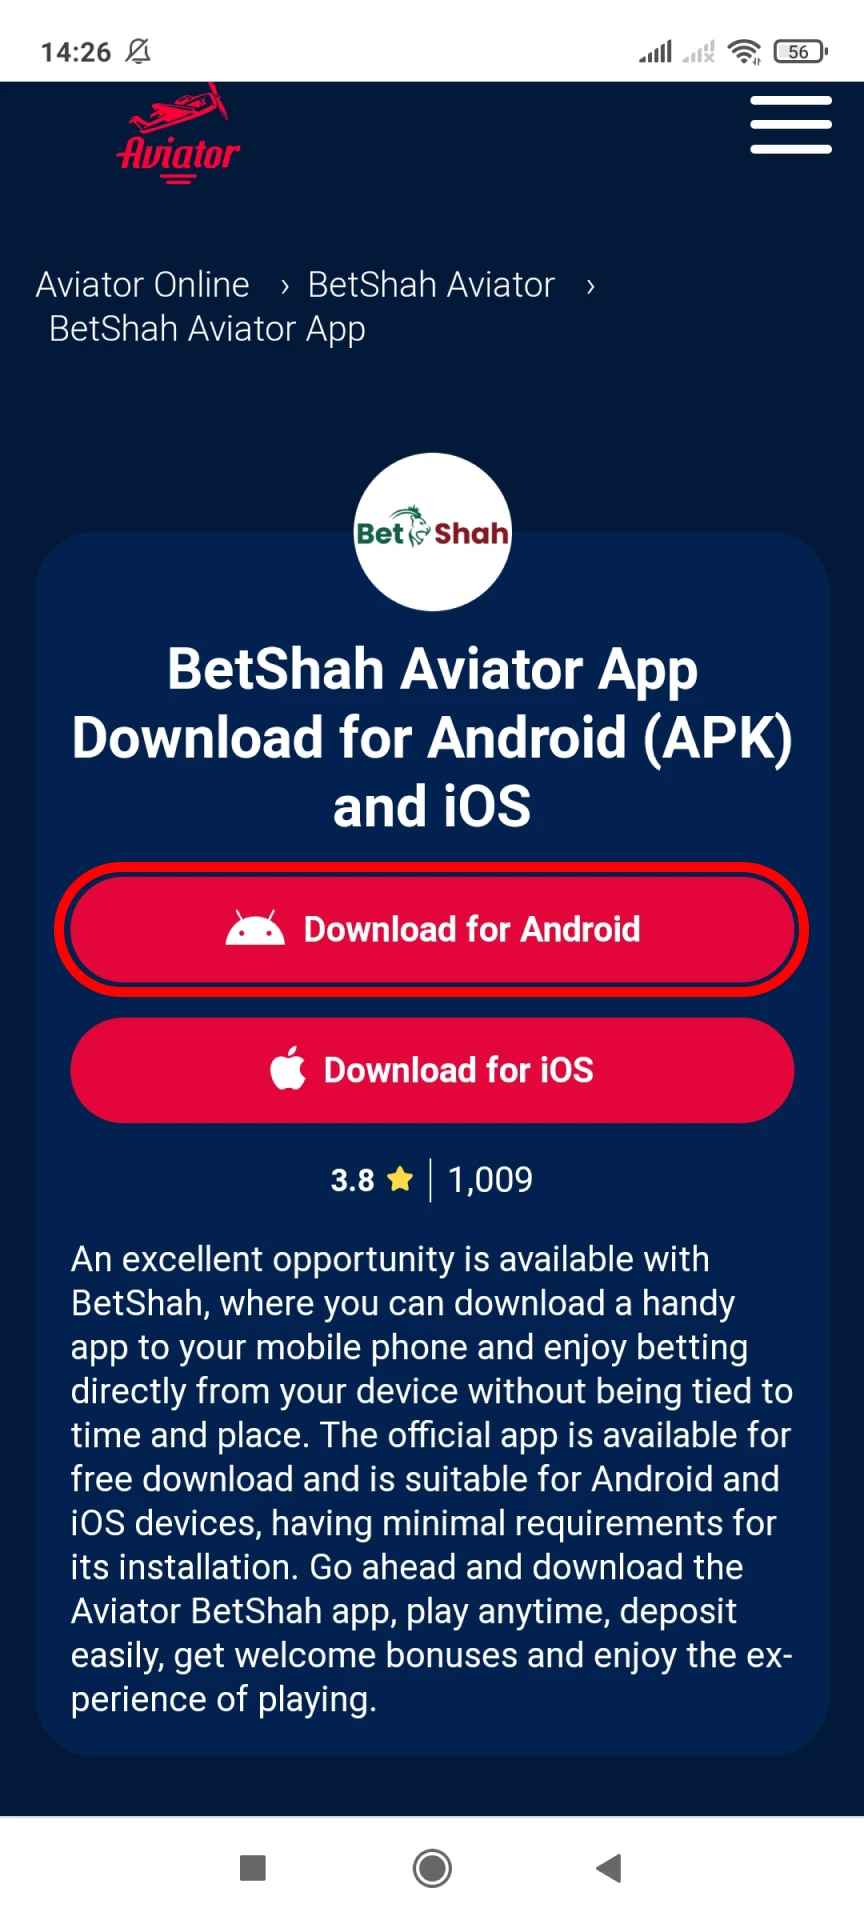 Go to the BetShah page to download the application.